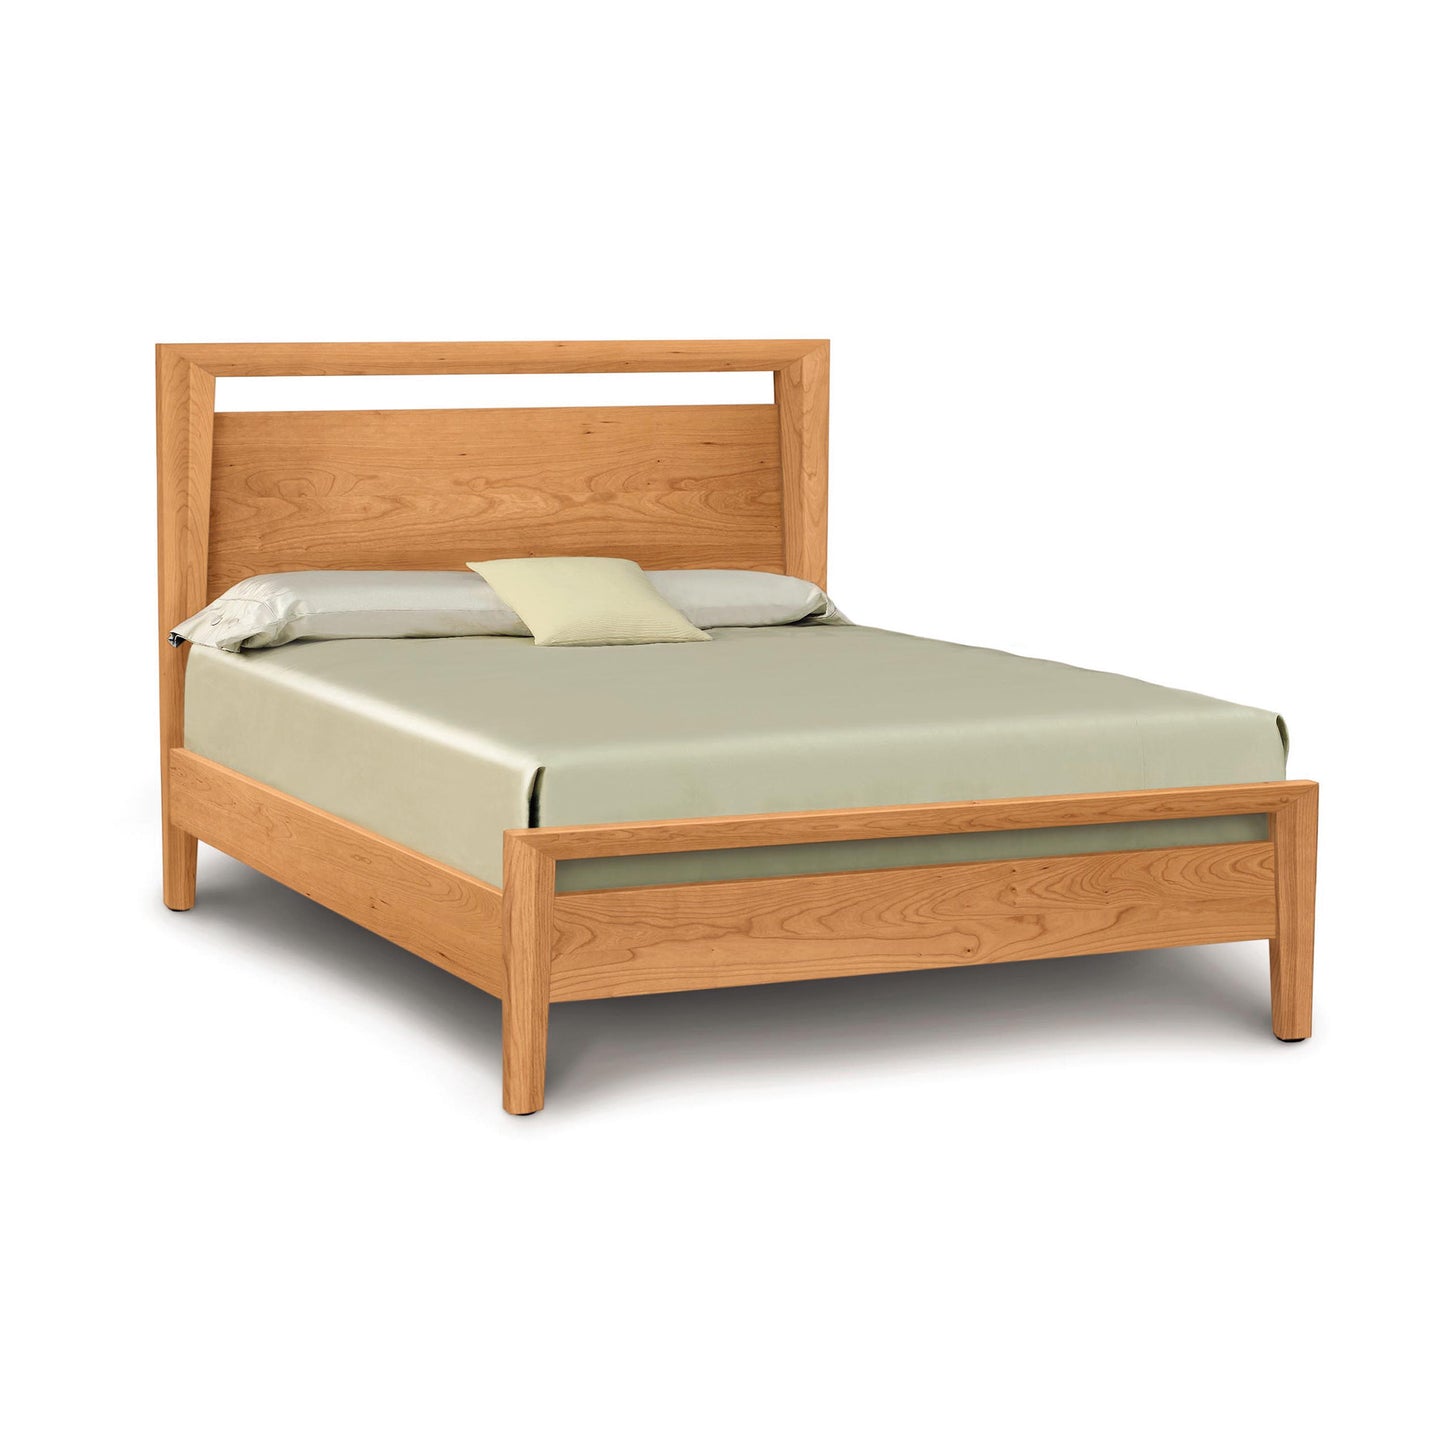 A Mansfield Cherry Platform Bed in the Arts and Crafts style with a simple headboard, complete with a mattress and a plain set of bedding consisting of a fitted sheet, flat sheet, and one pillow. Brand: Copeland Furniture